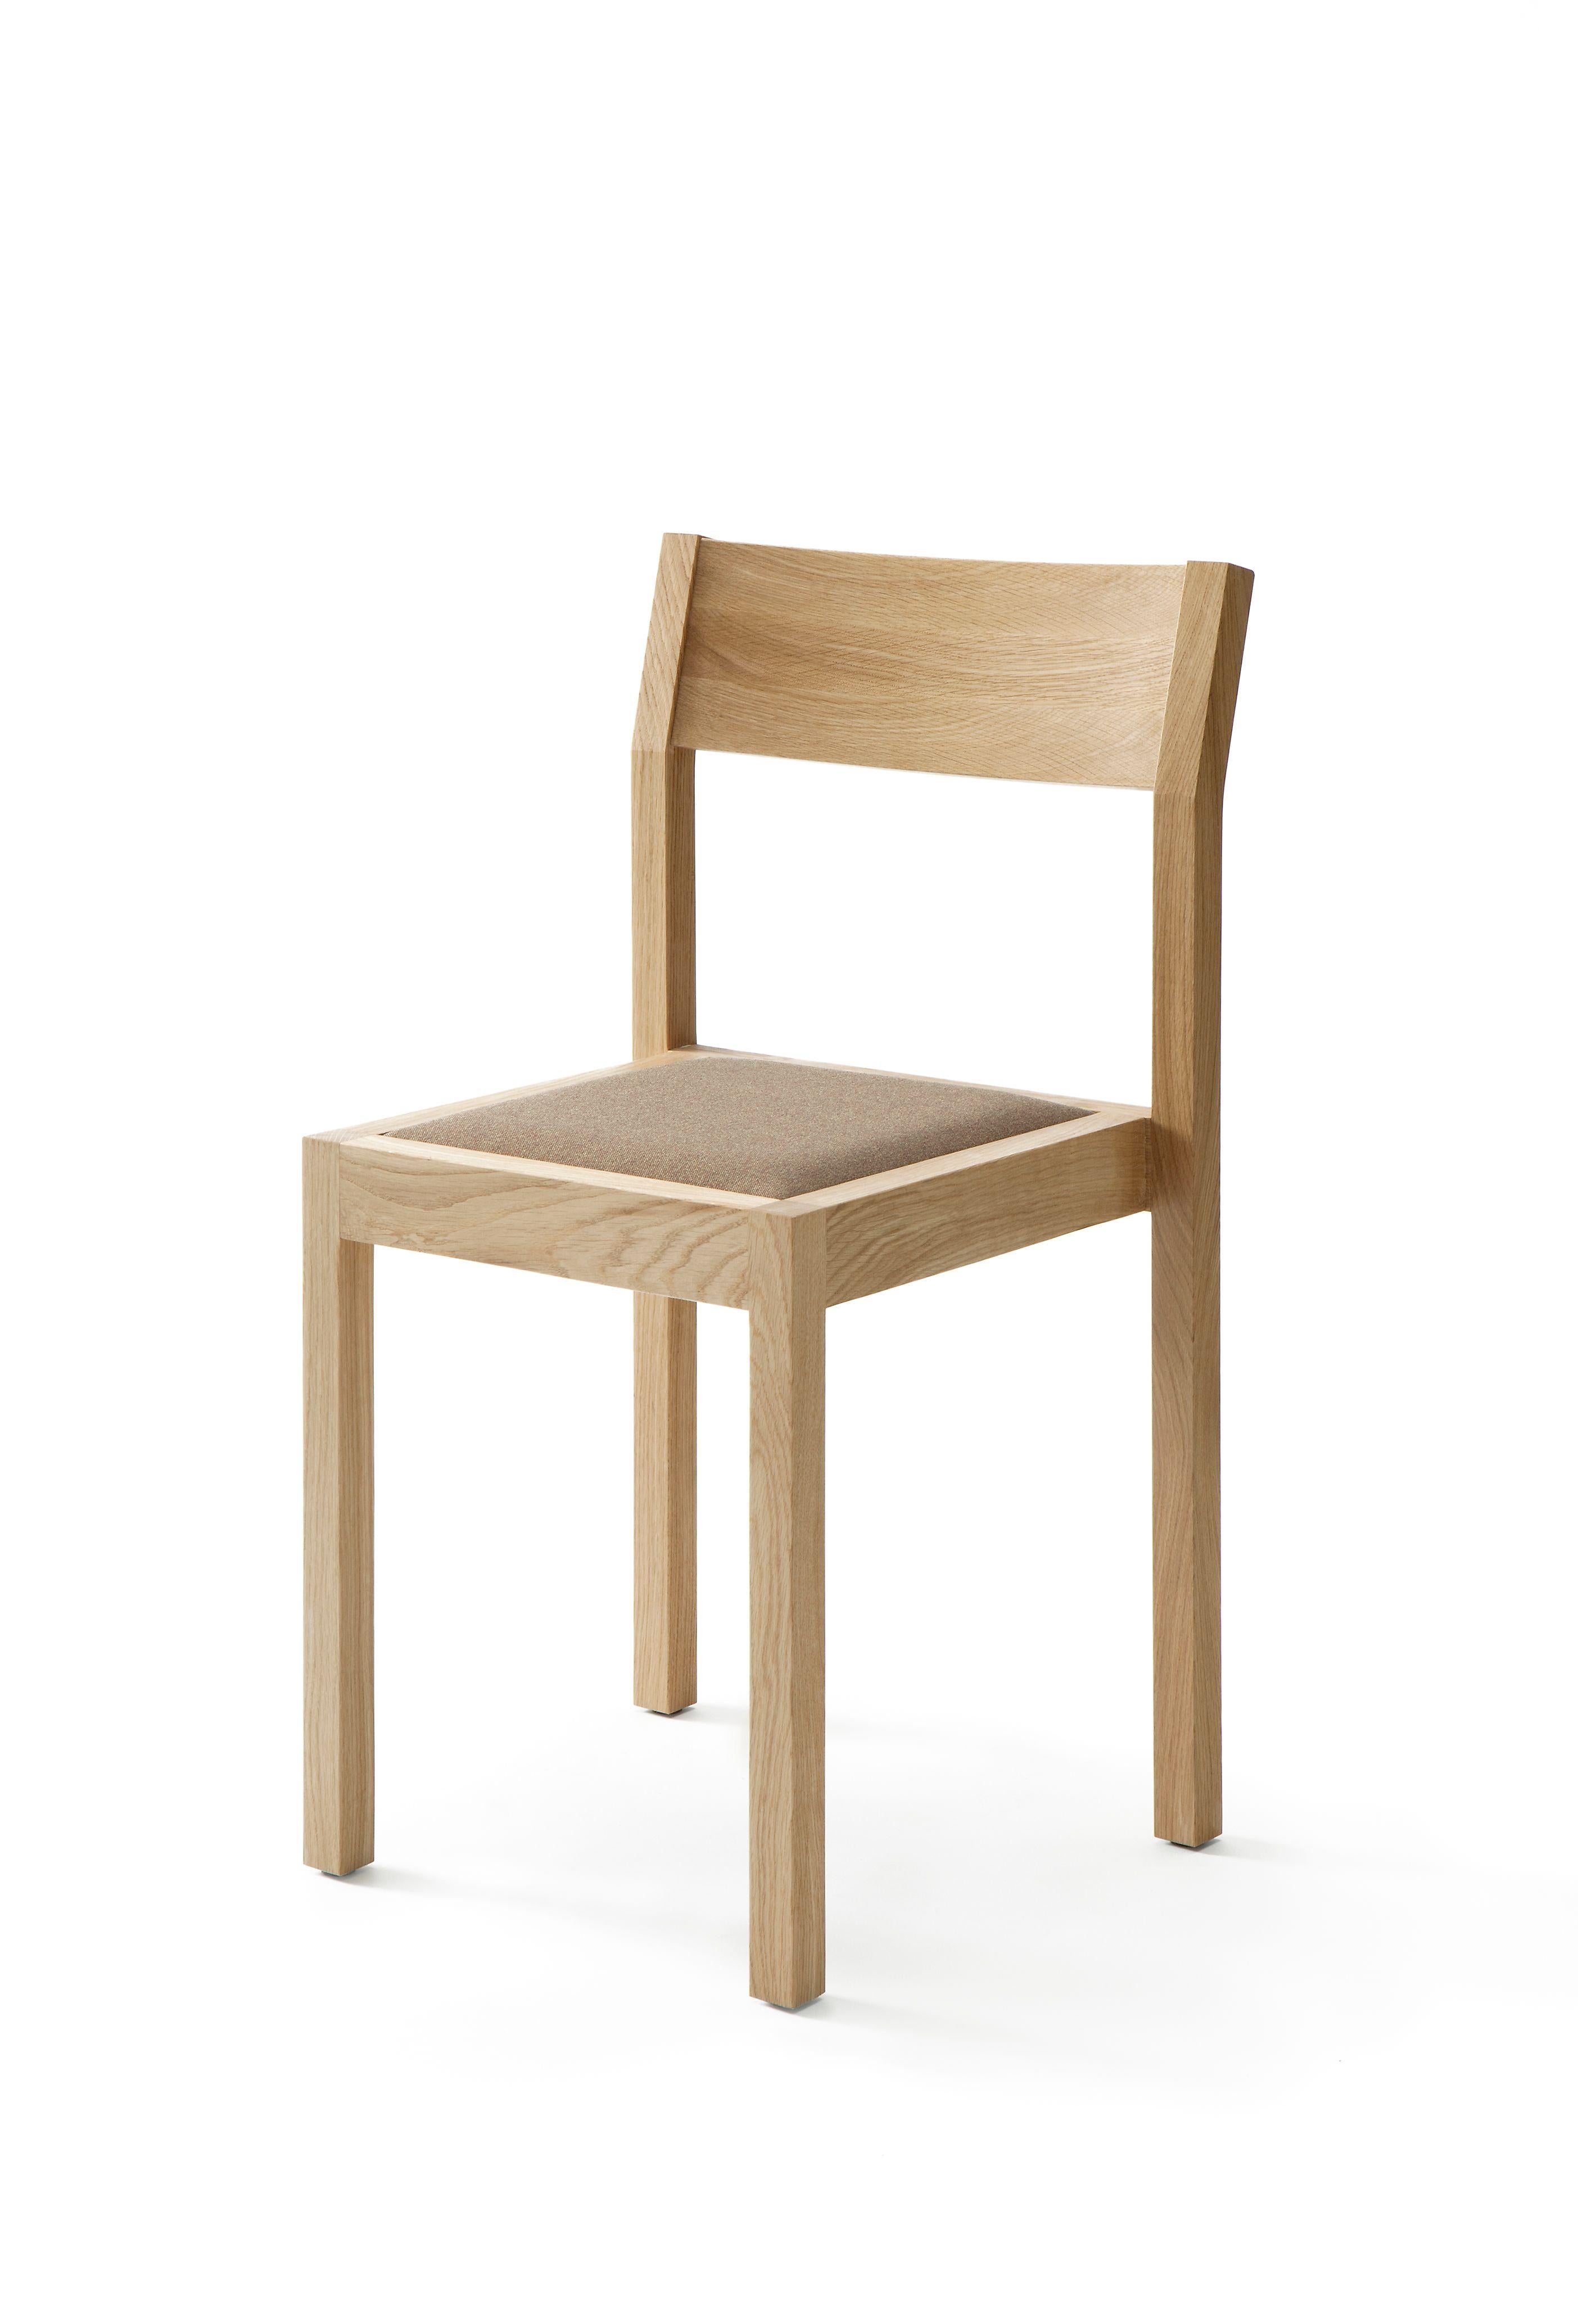 Seminar KVT2 followed Seminar KVT1 chair when the customers wanted to have a stackable version of this simple and well-proportioned chair. This chair can be equipped with a linking device, seat upholstery, an acoustic plate underneath the seat, and